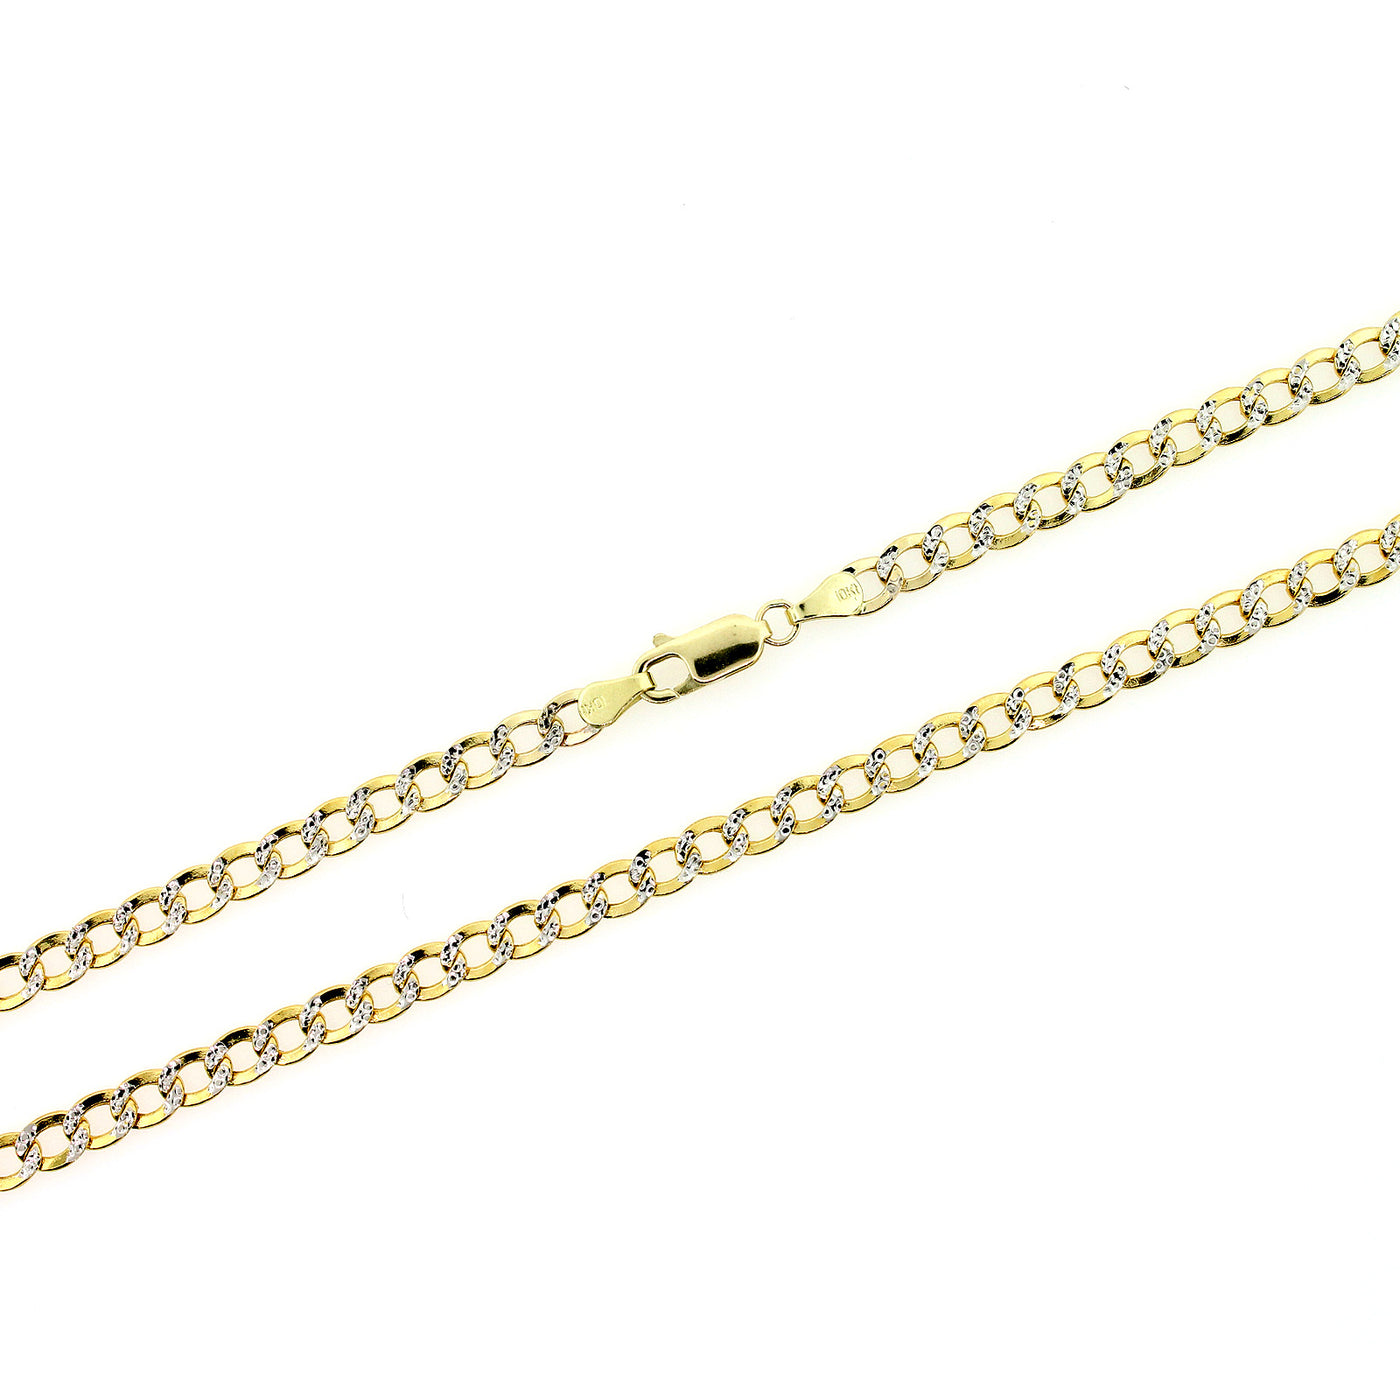 10K Solid Yellow Gold Diamond Cut Cuban Link Chain Necklace 2.5MM 16" 18" 20" 22" 24"